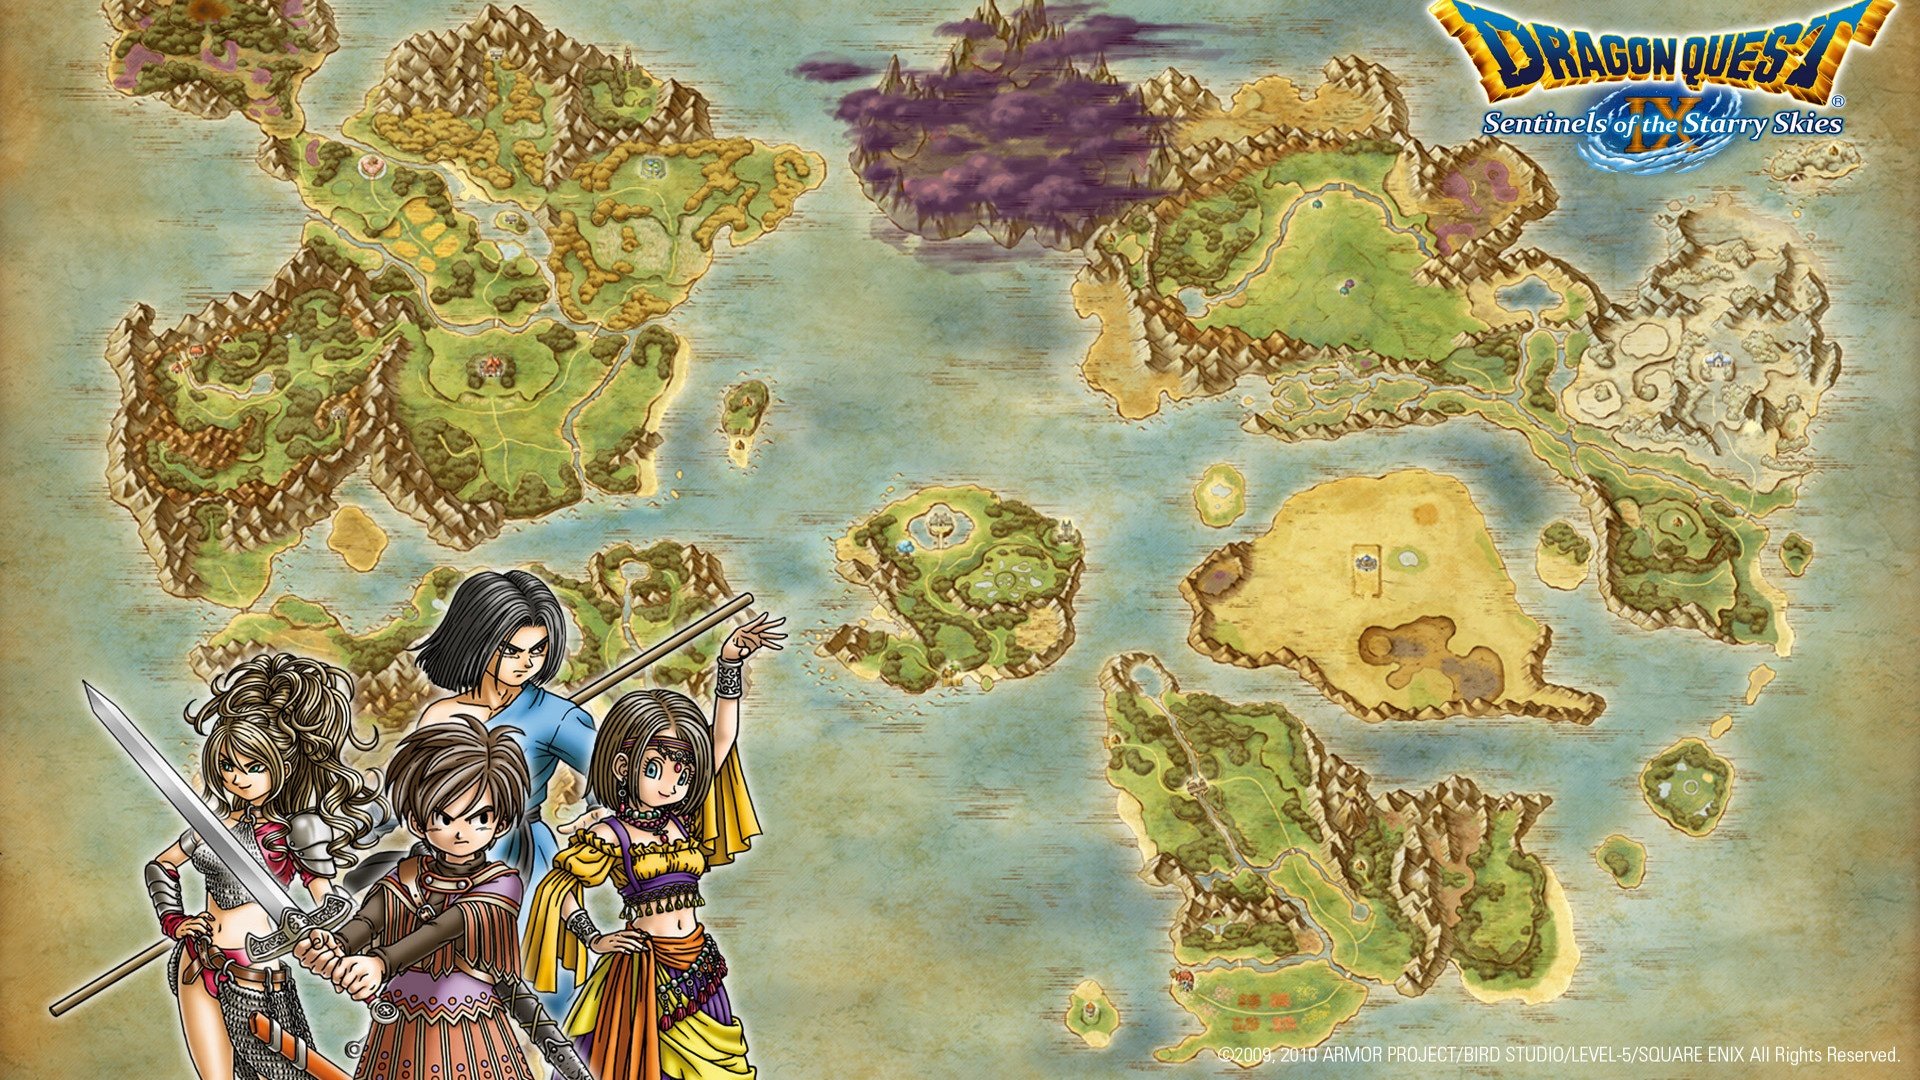 dragon quest ix: sentinels of the starry skies, video game, dragon quest